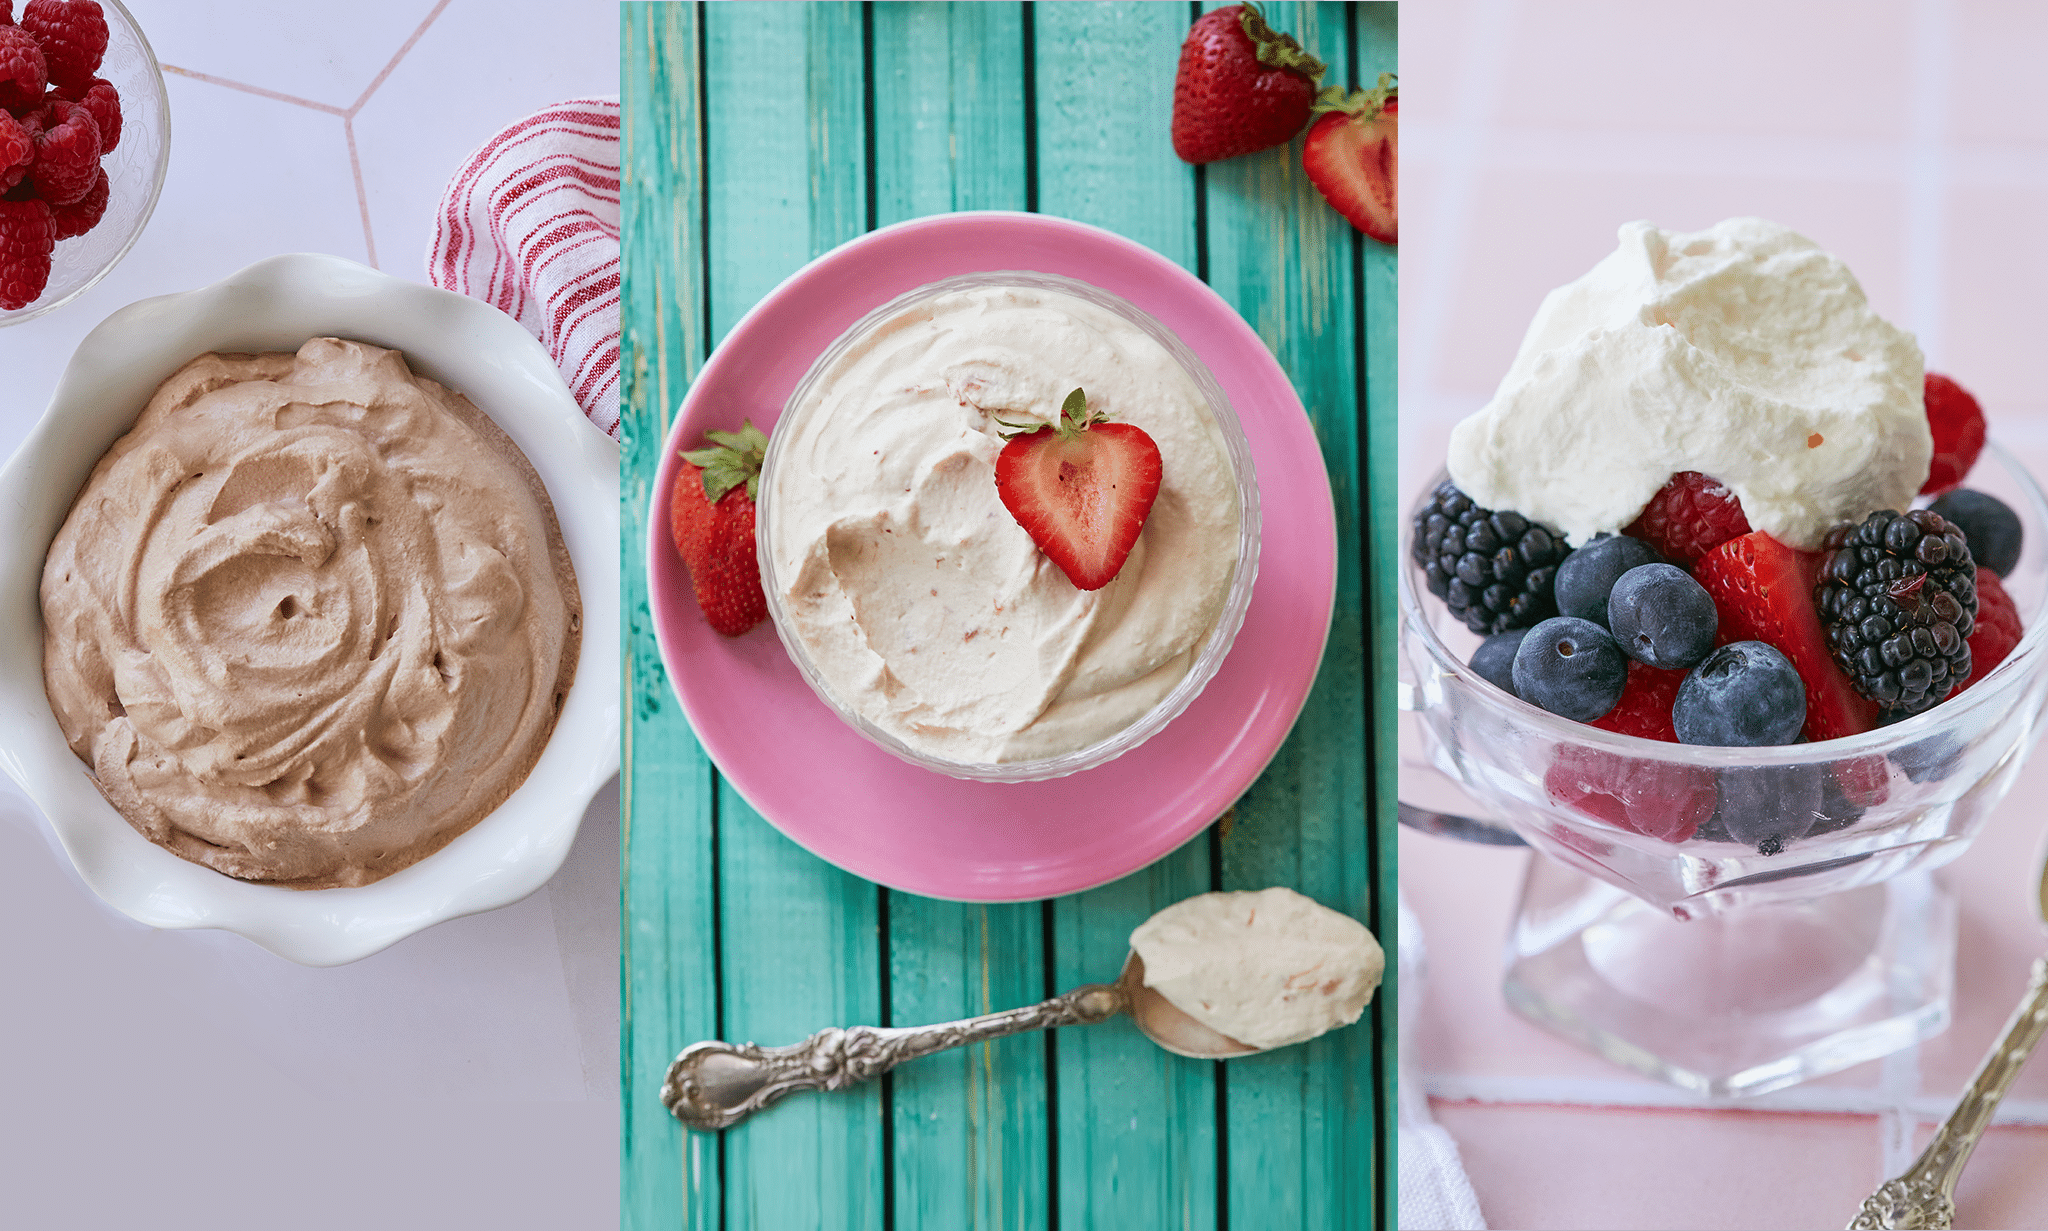 Three bowls of whipped cream flavors are side by side in a stitched together photo, including chocolate whipped cream, strawberry whipped cream, and creme fraiche.